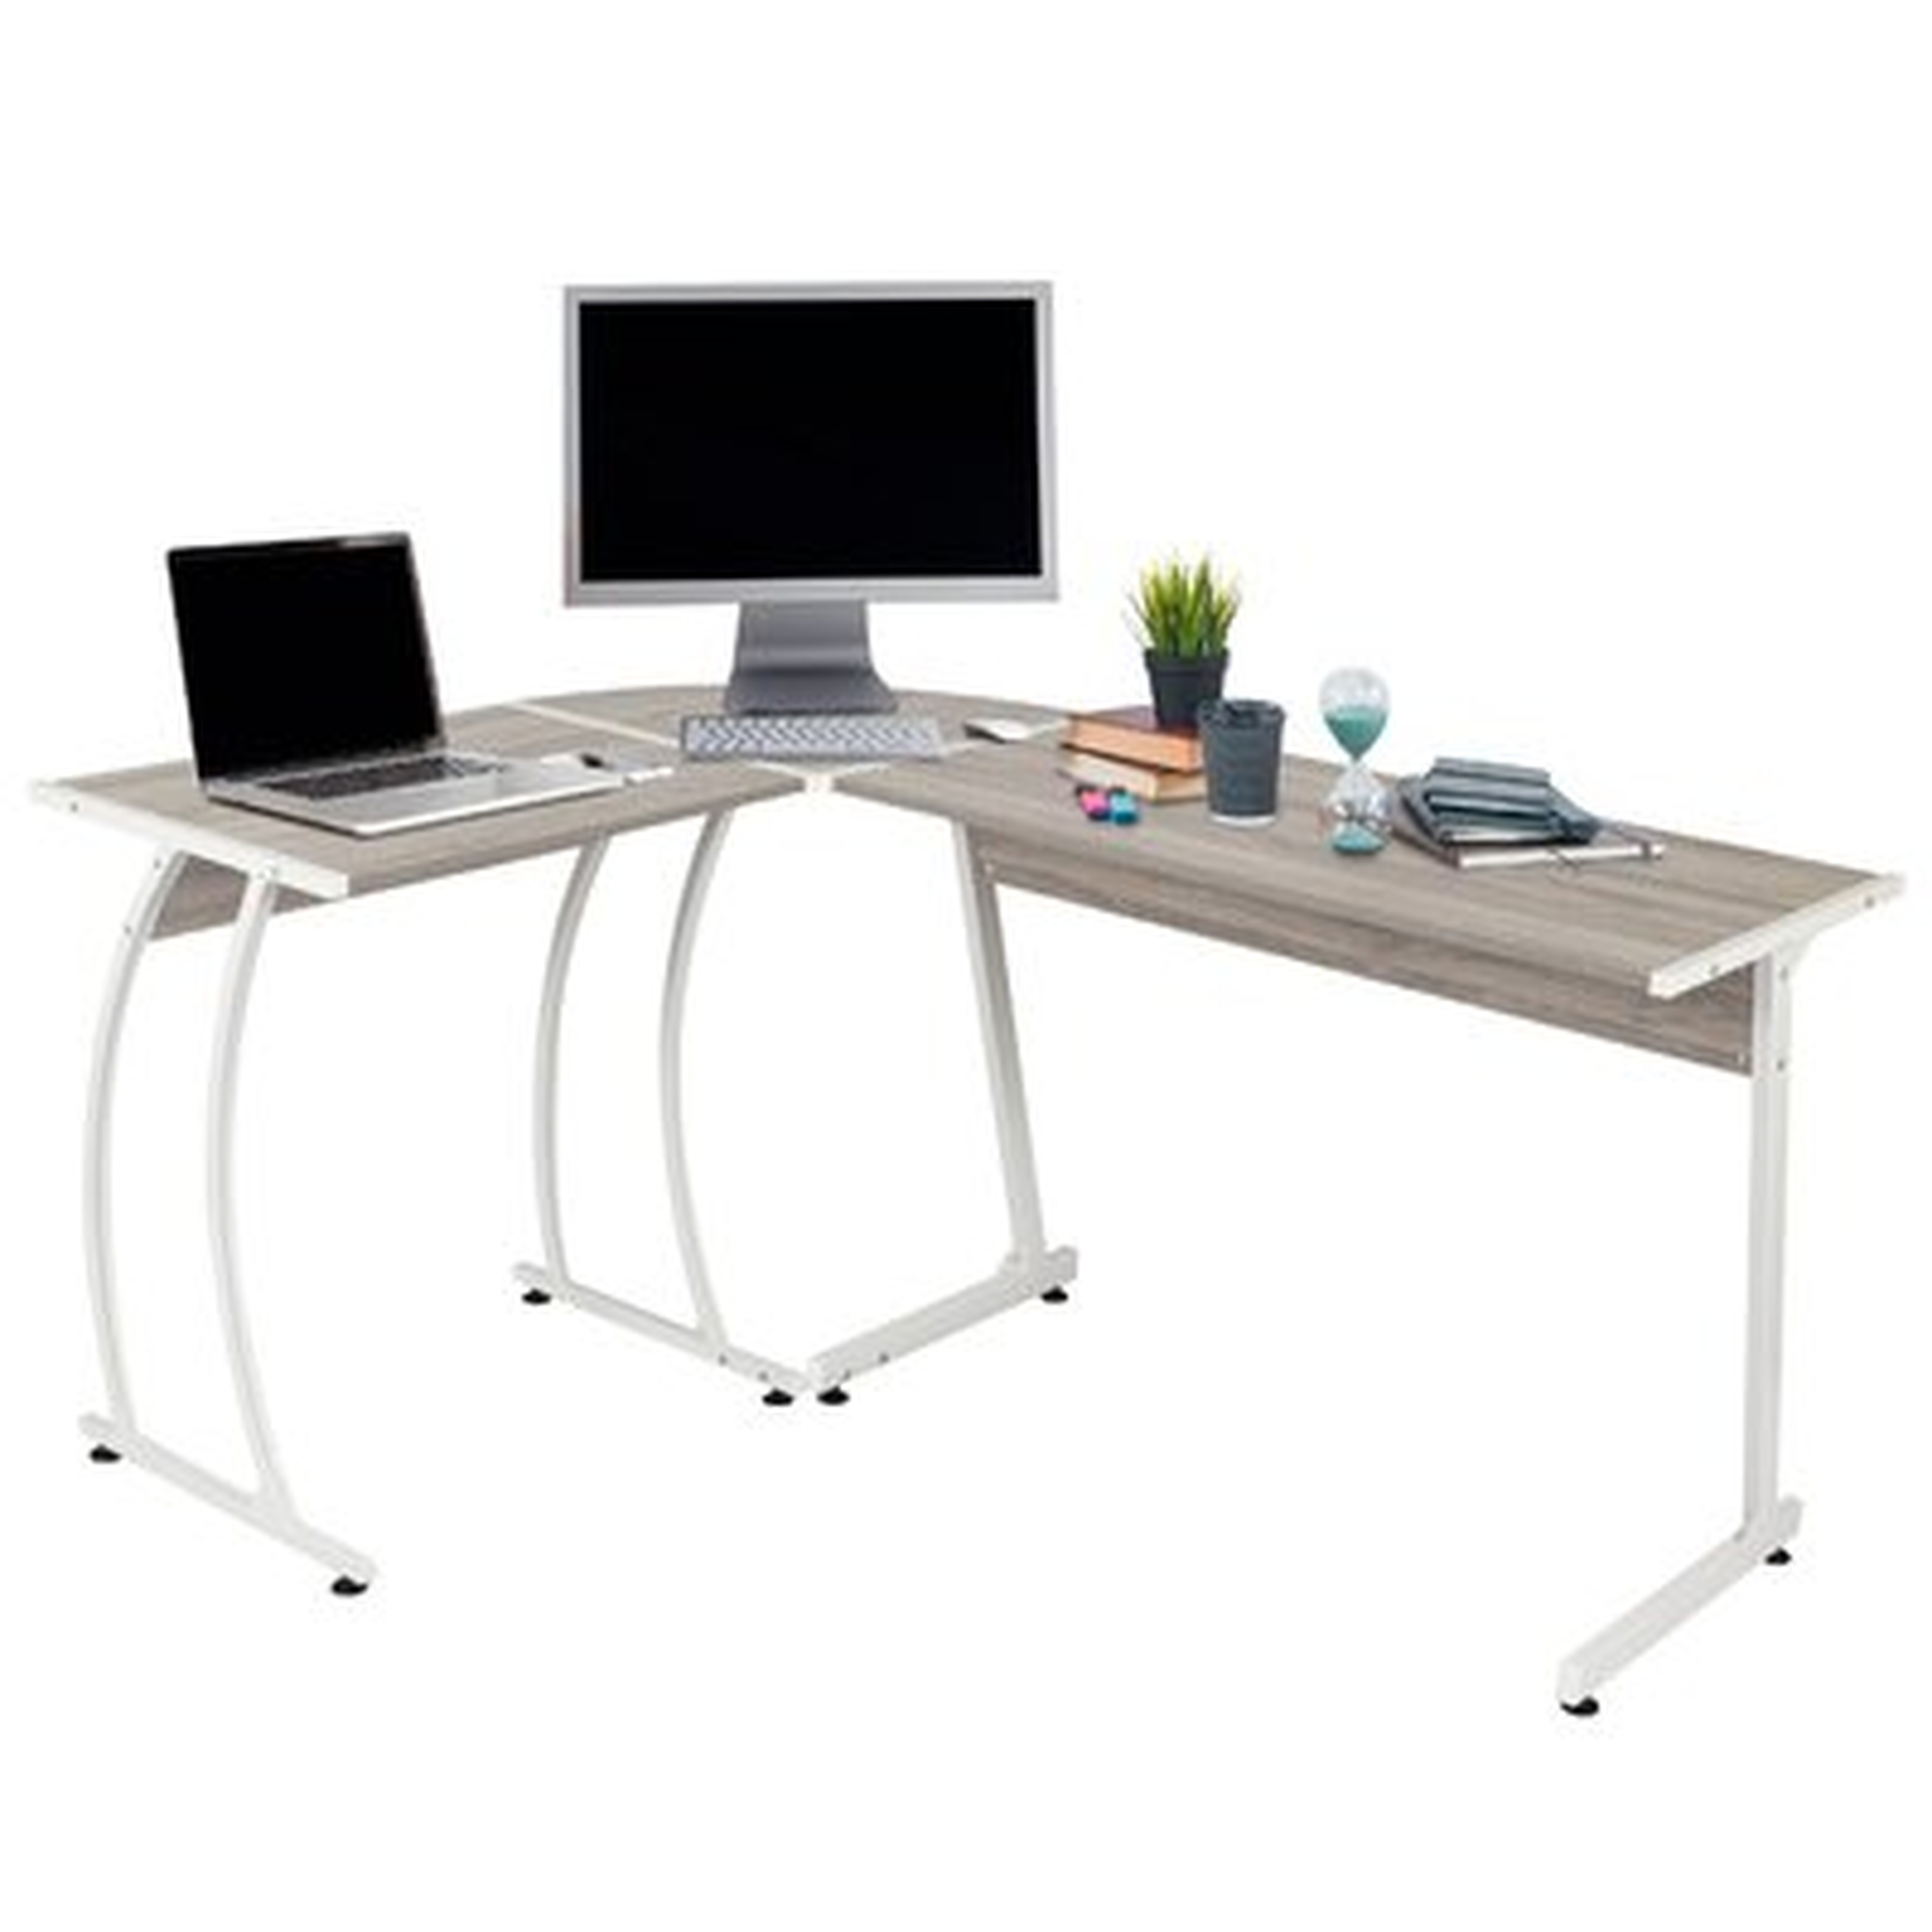 Ethan L-Shaped Corner Computer Desk Table, Large And Spacious For Dual Monitors, Perfect For Home Office, Writing Workstation, Gaming, 3-Piece Reversible Setup, Gray Walnut - Wayfair